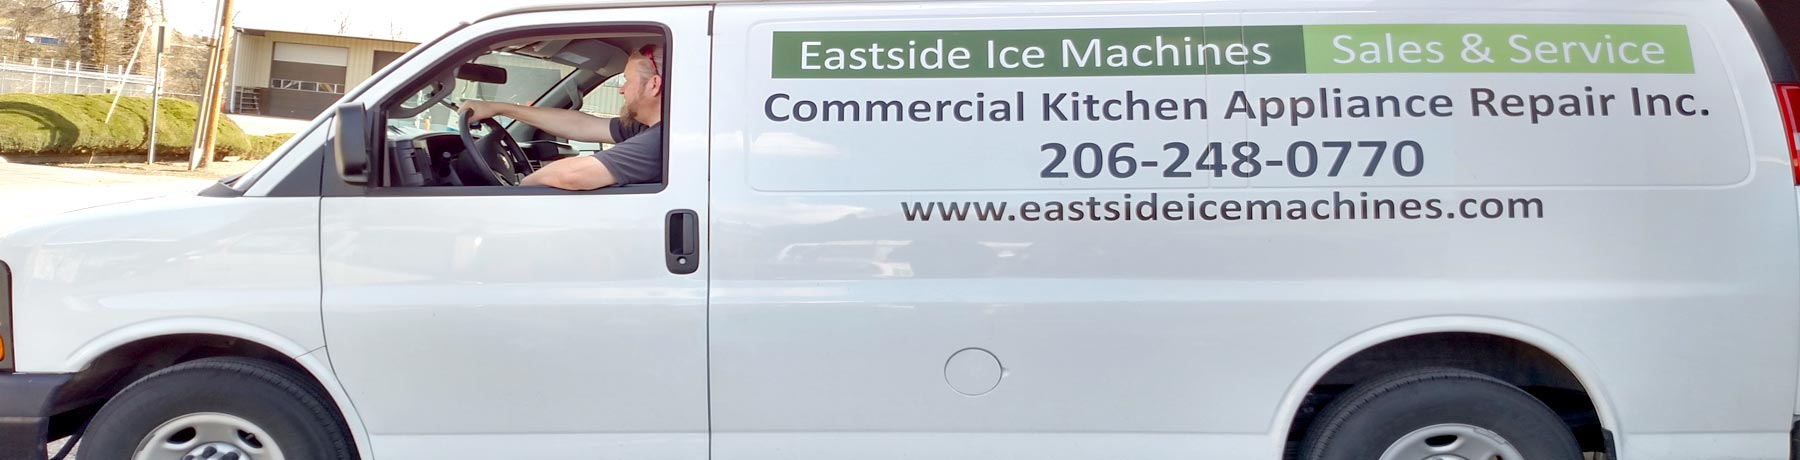 About Eastside Ice Machines Sales and Service